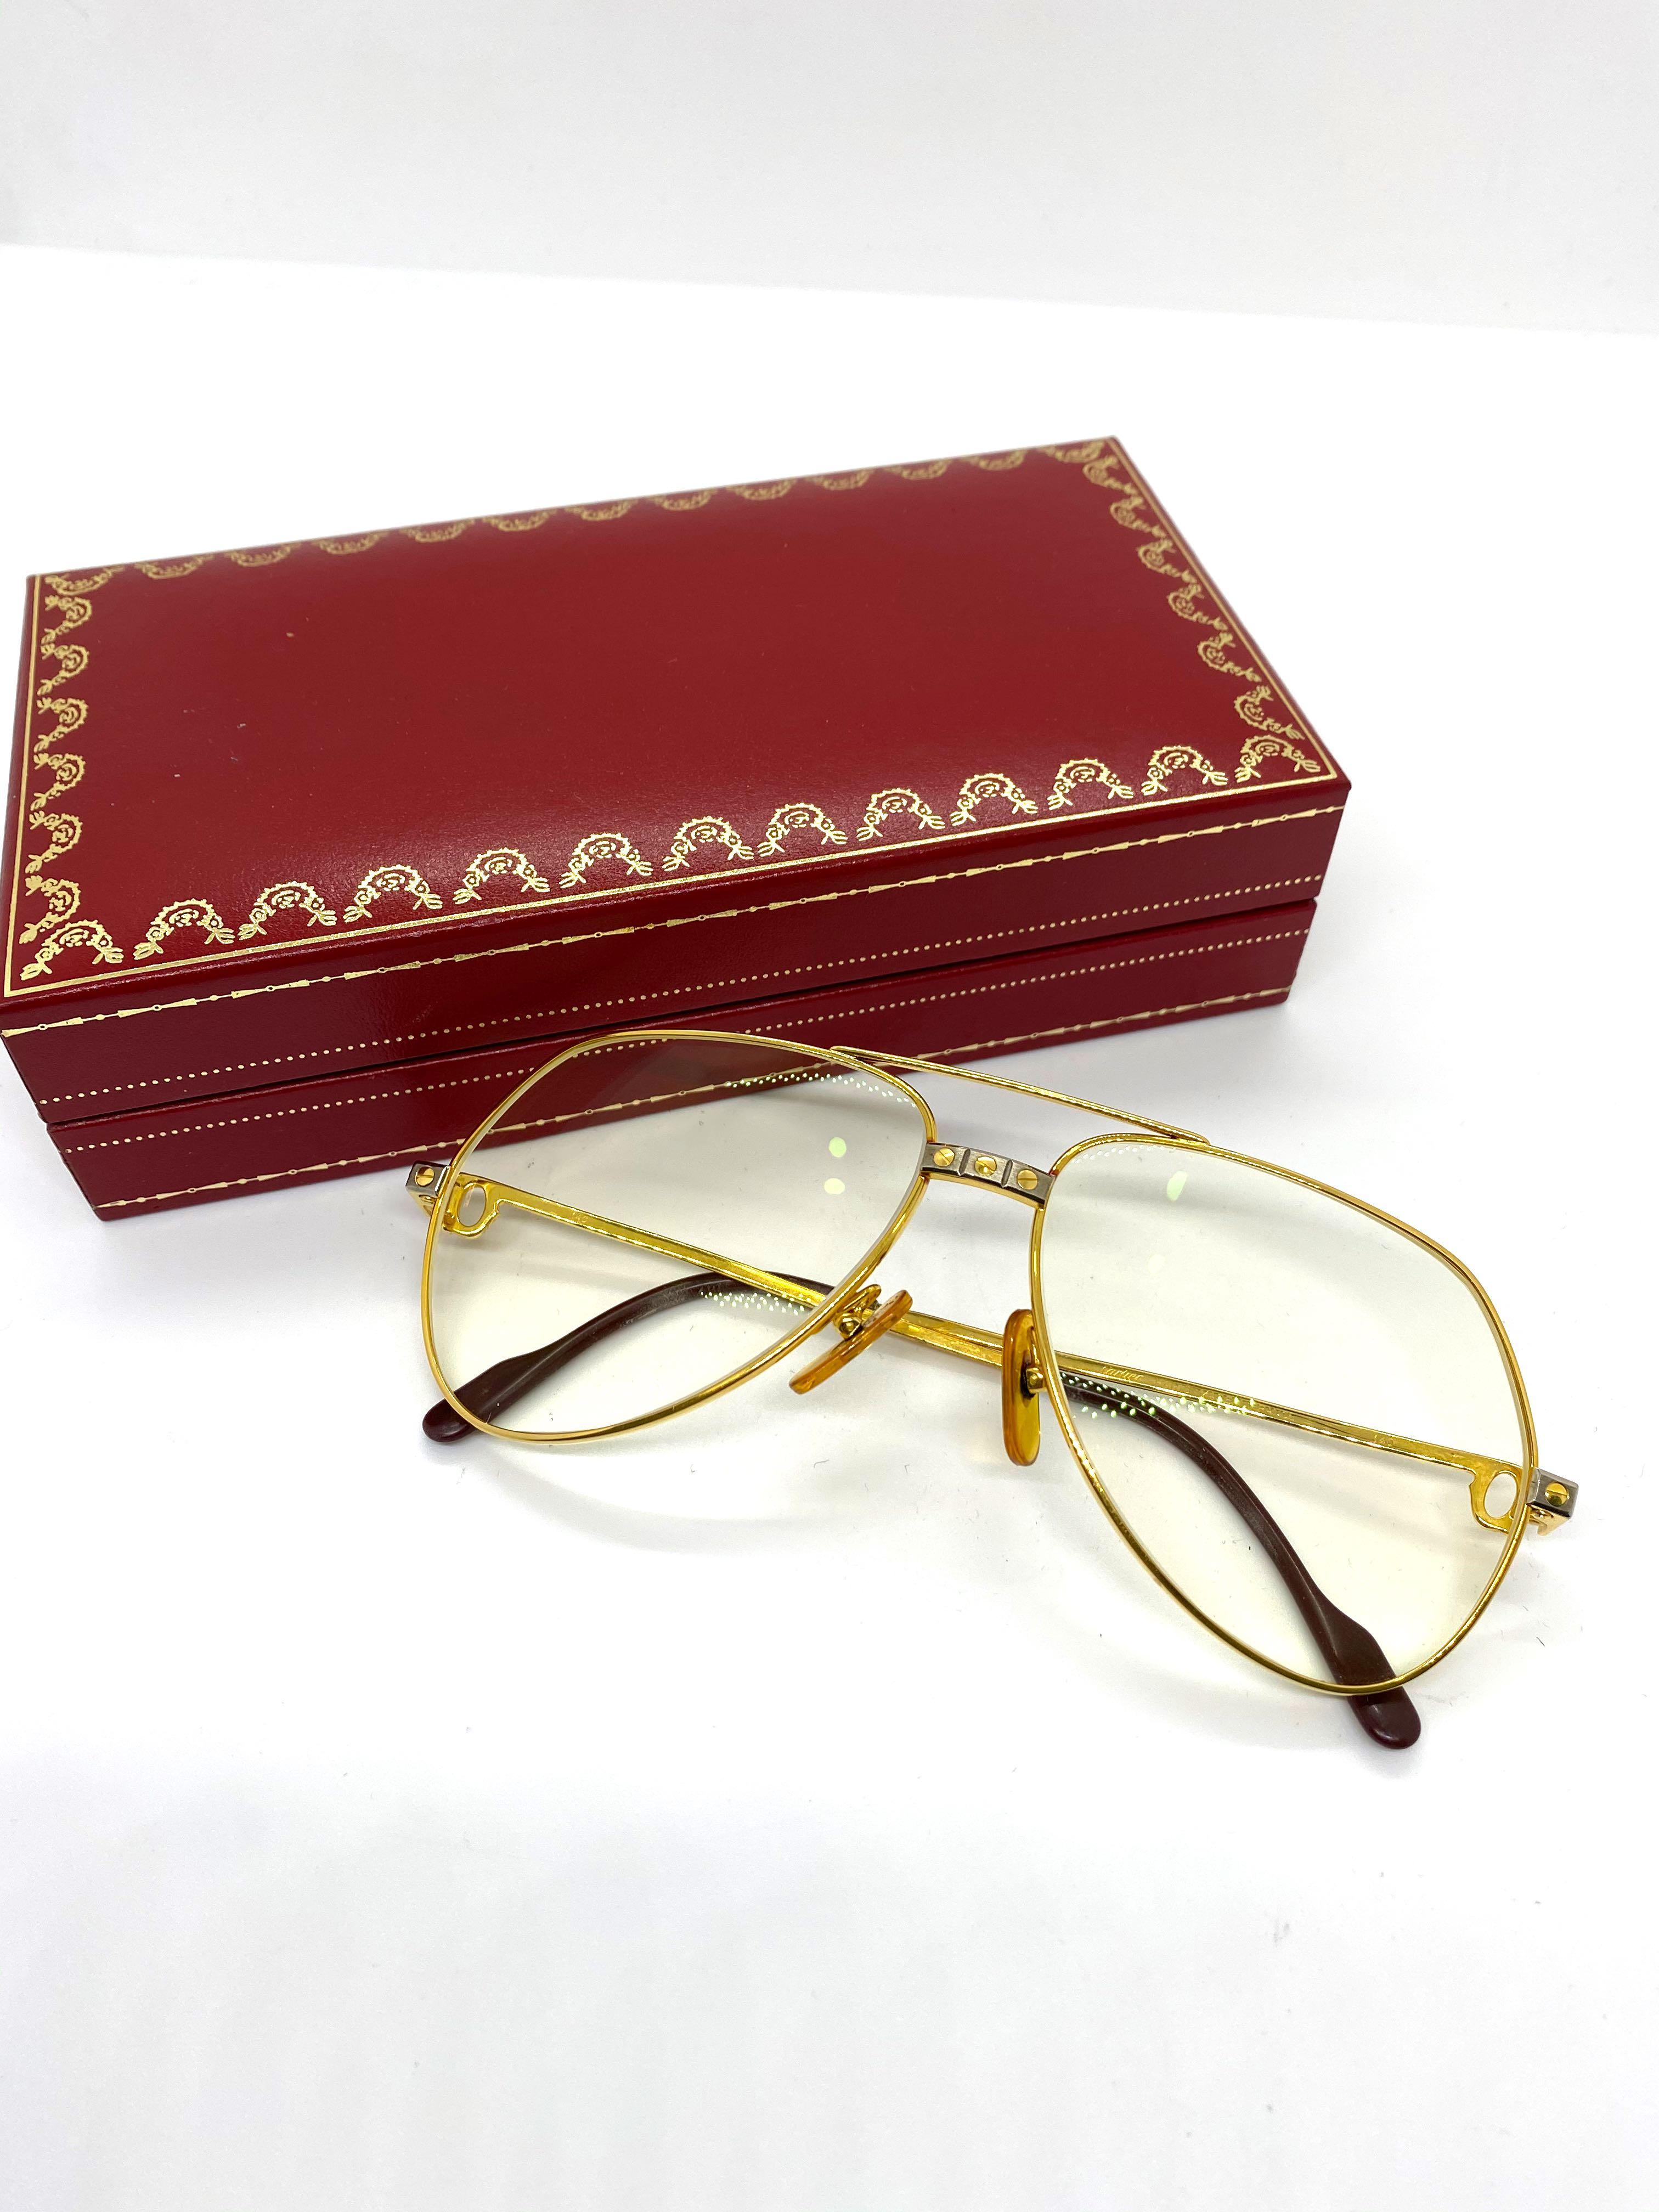 Discounted) Cartier Glasses with 